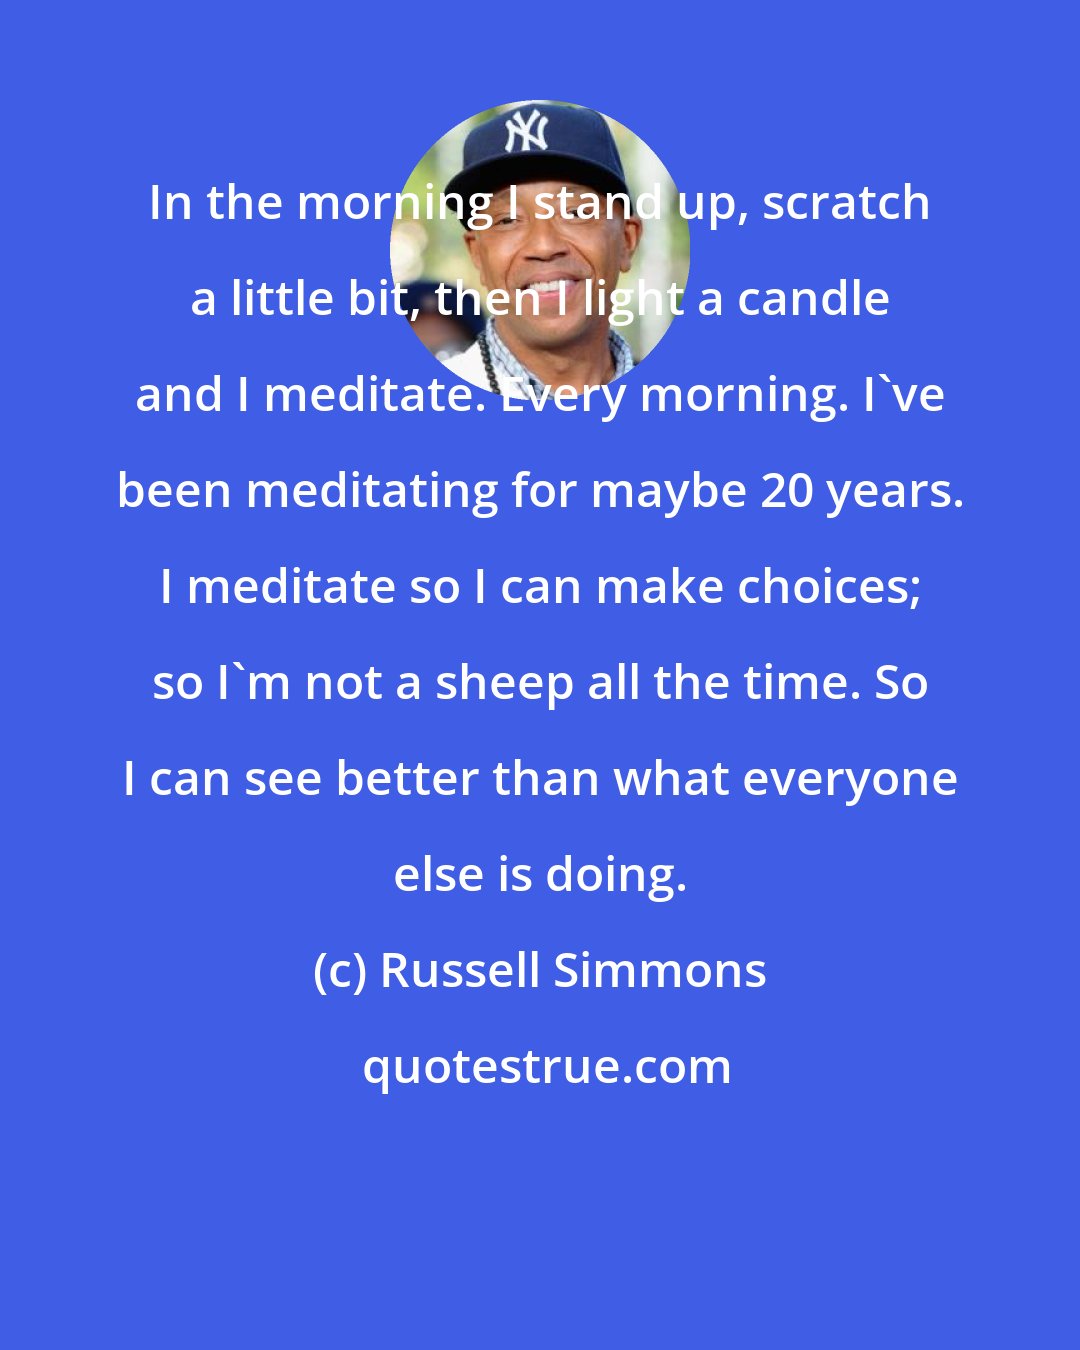 Russell Simmons: In the morning I stand up, scratch a little bit, then I light a candle and I meditate. Every morning. I've been meditating for maybe 20 years. I meditate so I can make choices; so I'm not a sheep all the time. So I can see better than what everyone else is doing.